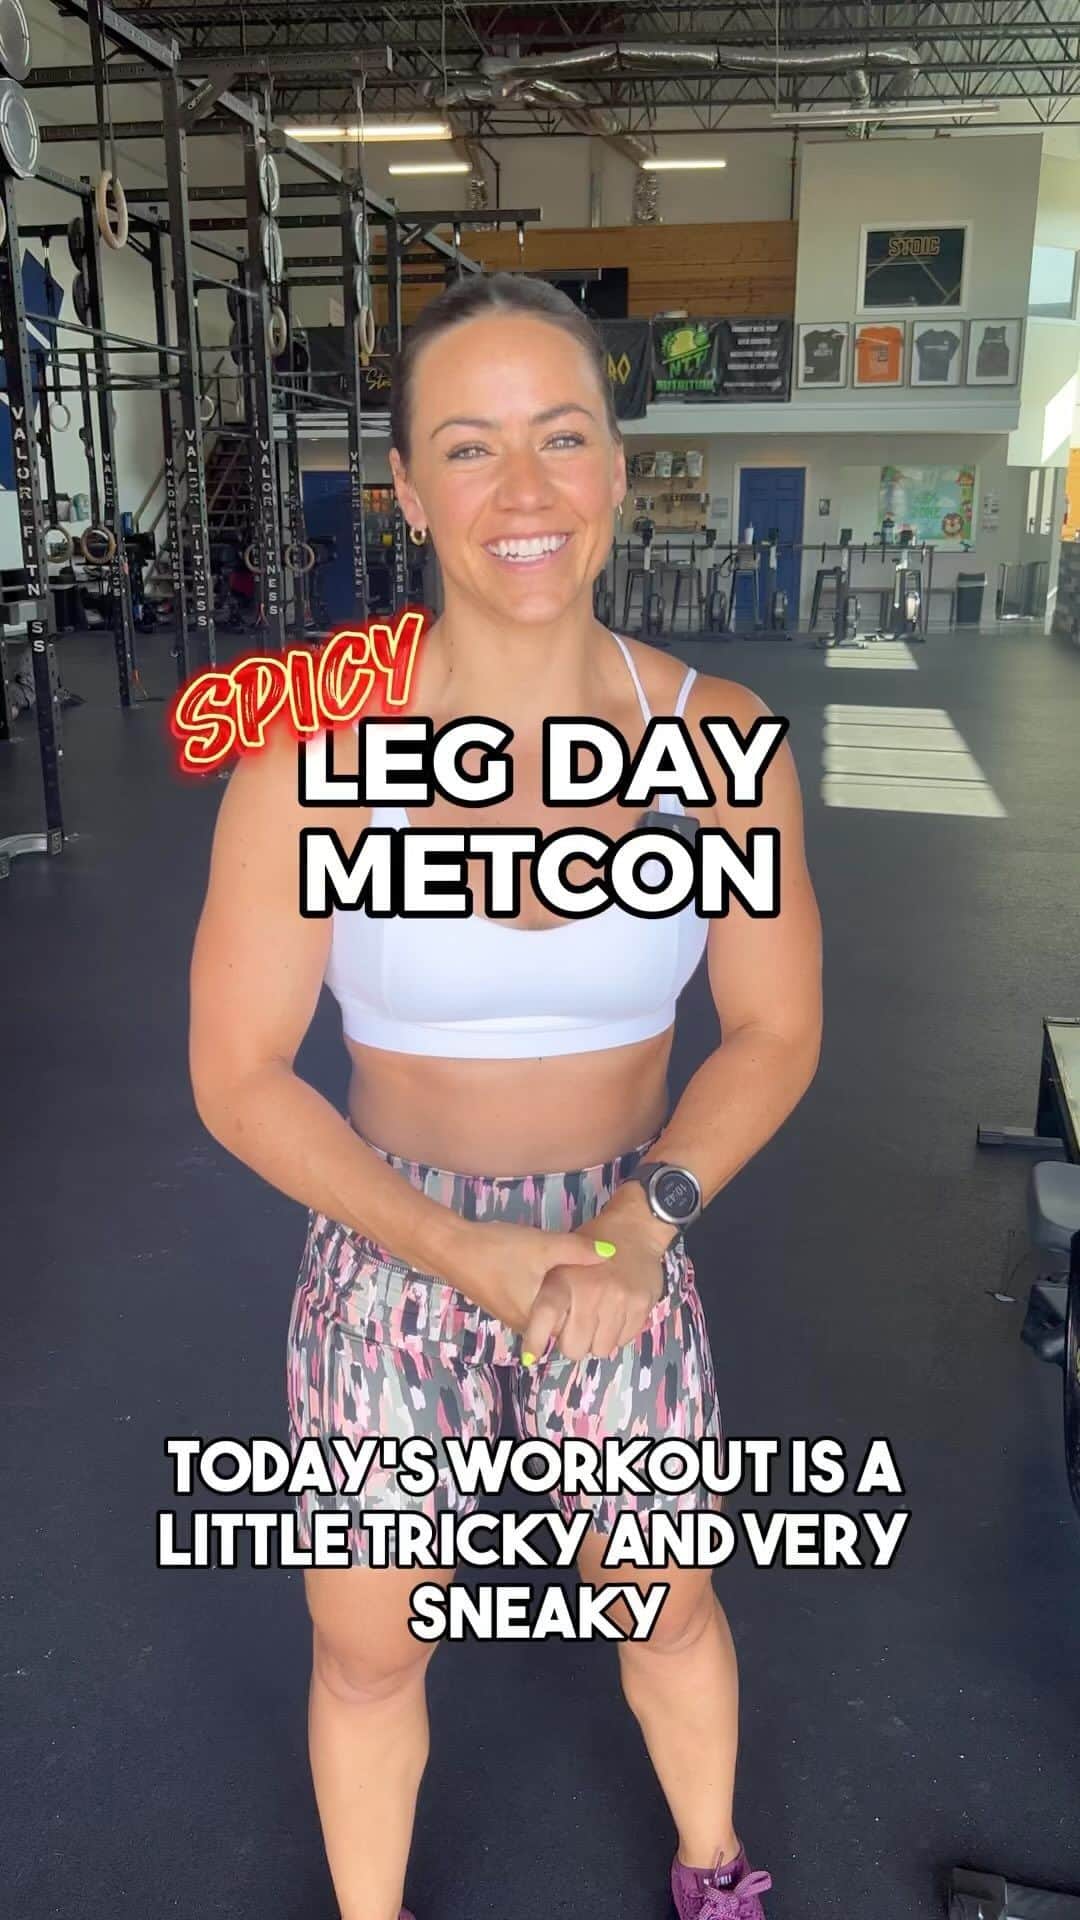 Camille Leblanc-Bazinetのインスタグラム：「Woooooo 🥵 this one will catch up with you. Test your power output with this All Out Workout for time from Feroce Fitness programming ⬇️  All Out Workout: 5 rounds  15 cal row 10 front squats  Rest 30 seconds between rounds   Notes 📝 ➡️This workout is rounds for time. Pick a pace for the row that you can match each round.  ➡️If you don’t have a rower available, perform a renegade row, choosing a weight that you can complete the reps unbroken. Keep your hips square as you pull the weight up to your mid line.  ➡️For the front squats, choose a weight that you can perform the reps unbroken the whole workout. You can hold a barbell in the front rack, two dumbbells in the front rack or a dumbbell like a goblet squat. Regardless, keep your chest up, sit into your heels and keep your back arched throughout the movement.  ➡️Record the time it took to complete the whole workout.  Scale up: Increase weight.   Scale down: Shorten to 3 rounds. Front squats - decrease weight , squat to a box   🦄🦄🦄  #concept2rower #metcon #legdayworkout」